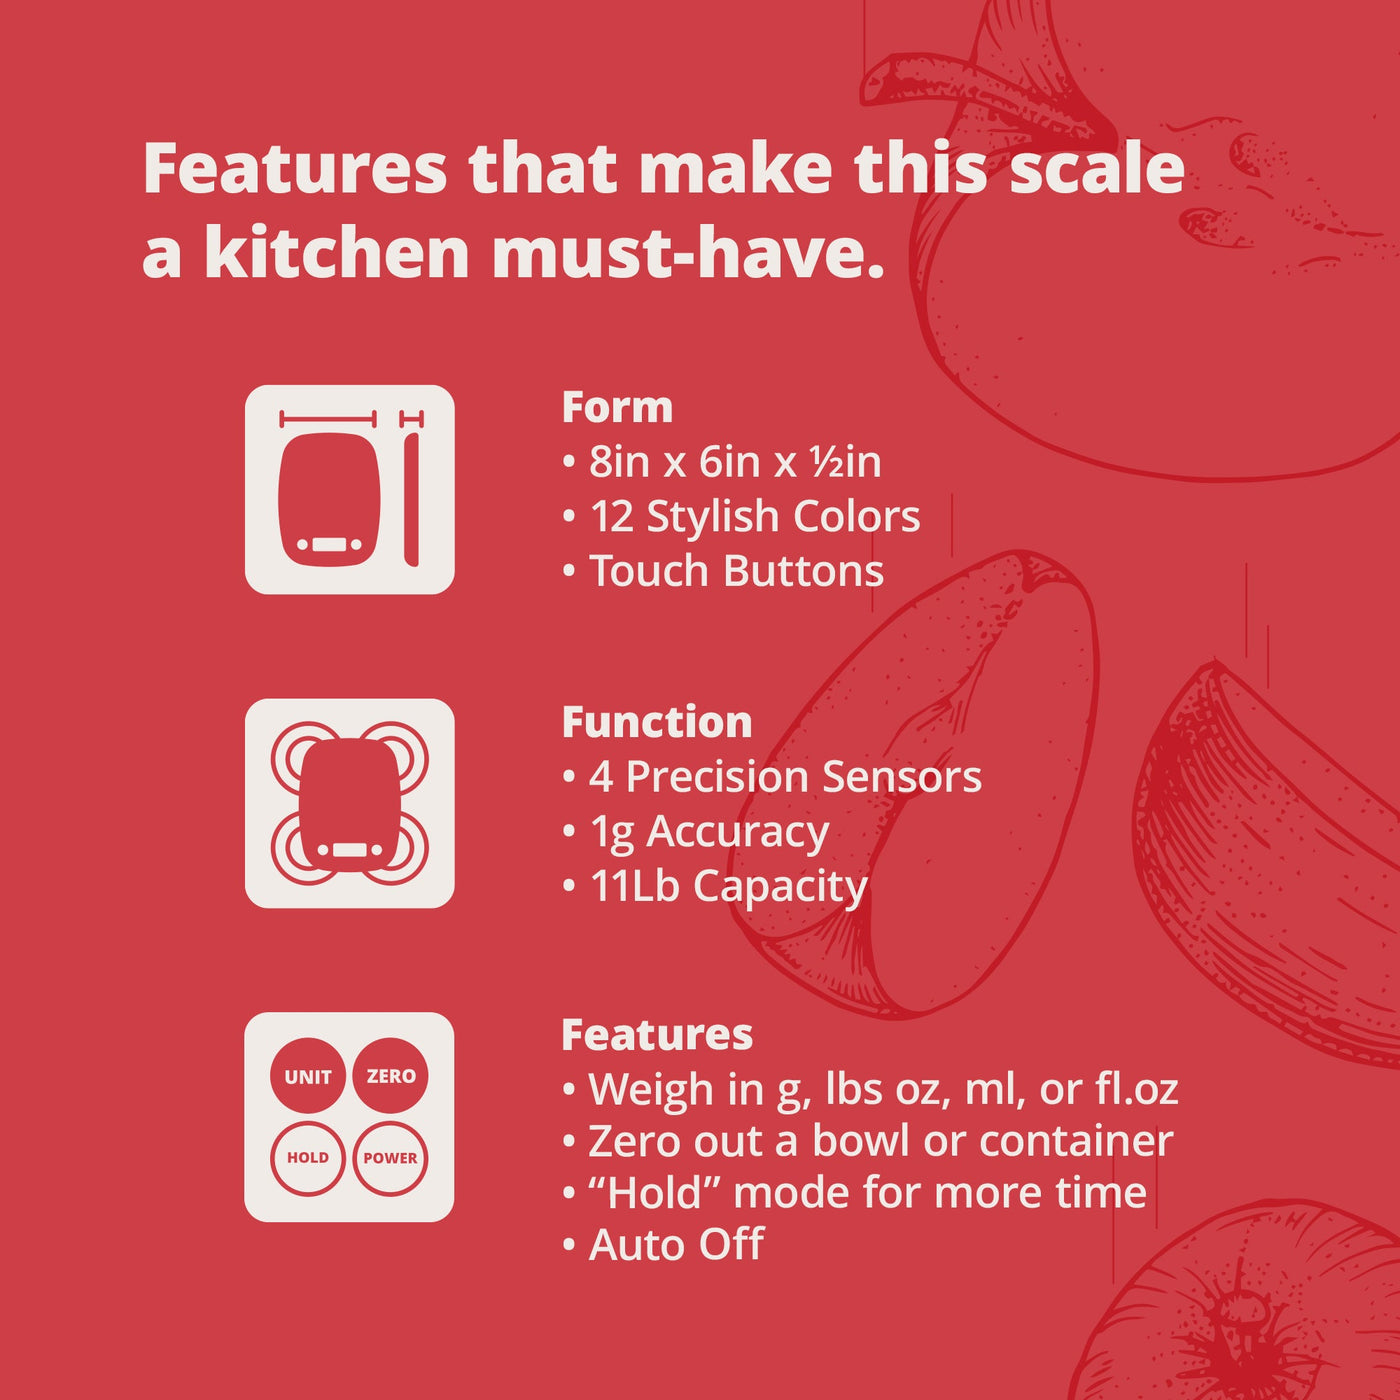 How to Use a Food Scale & Why it's a Must-Have